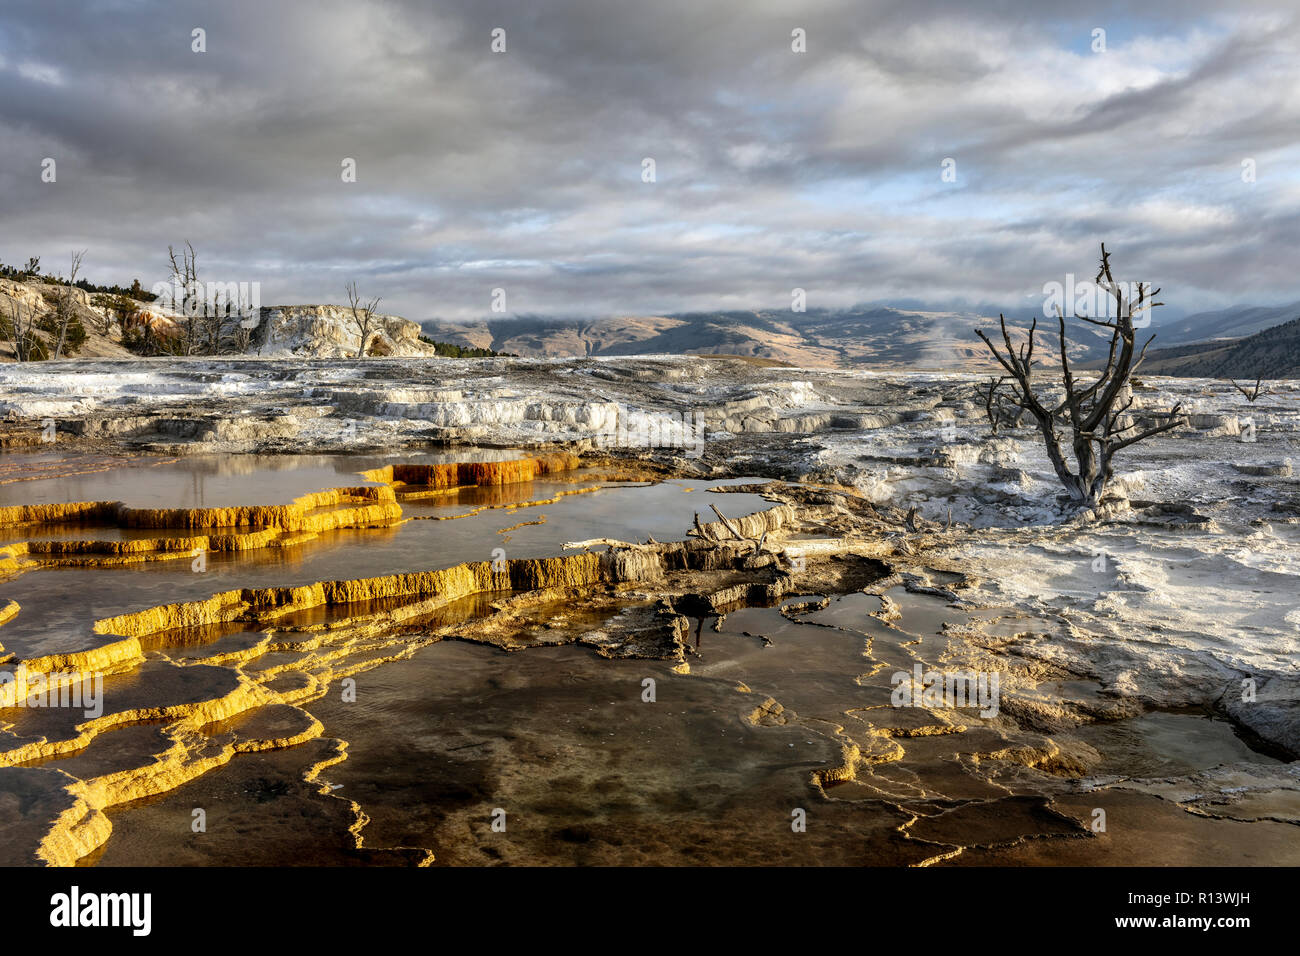 WY03566-00...WYOMING - terrasse supérieure de Mammoth Hot Springs en Yelllowstone Parc National. Banque D'Images